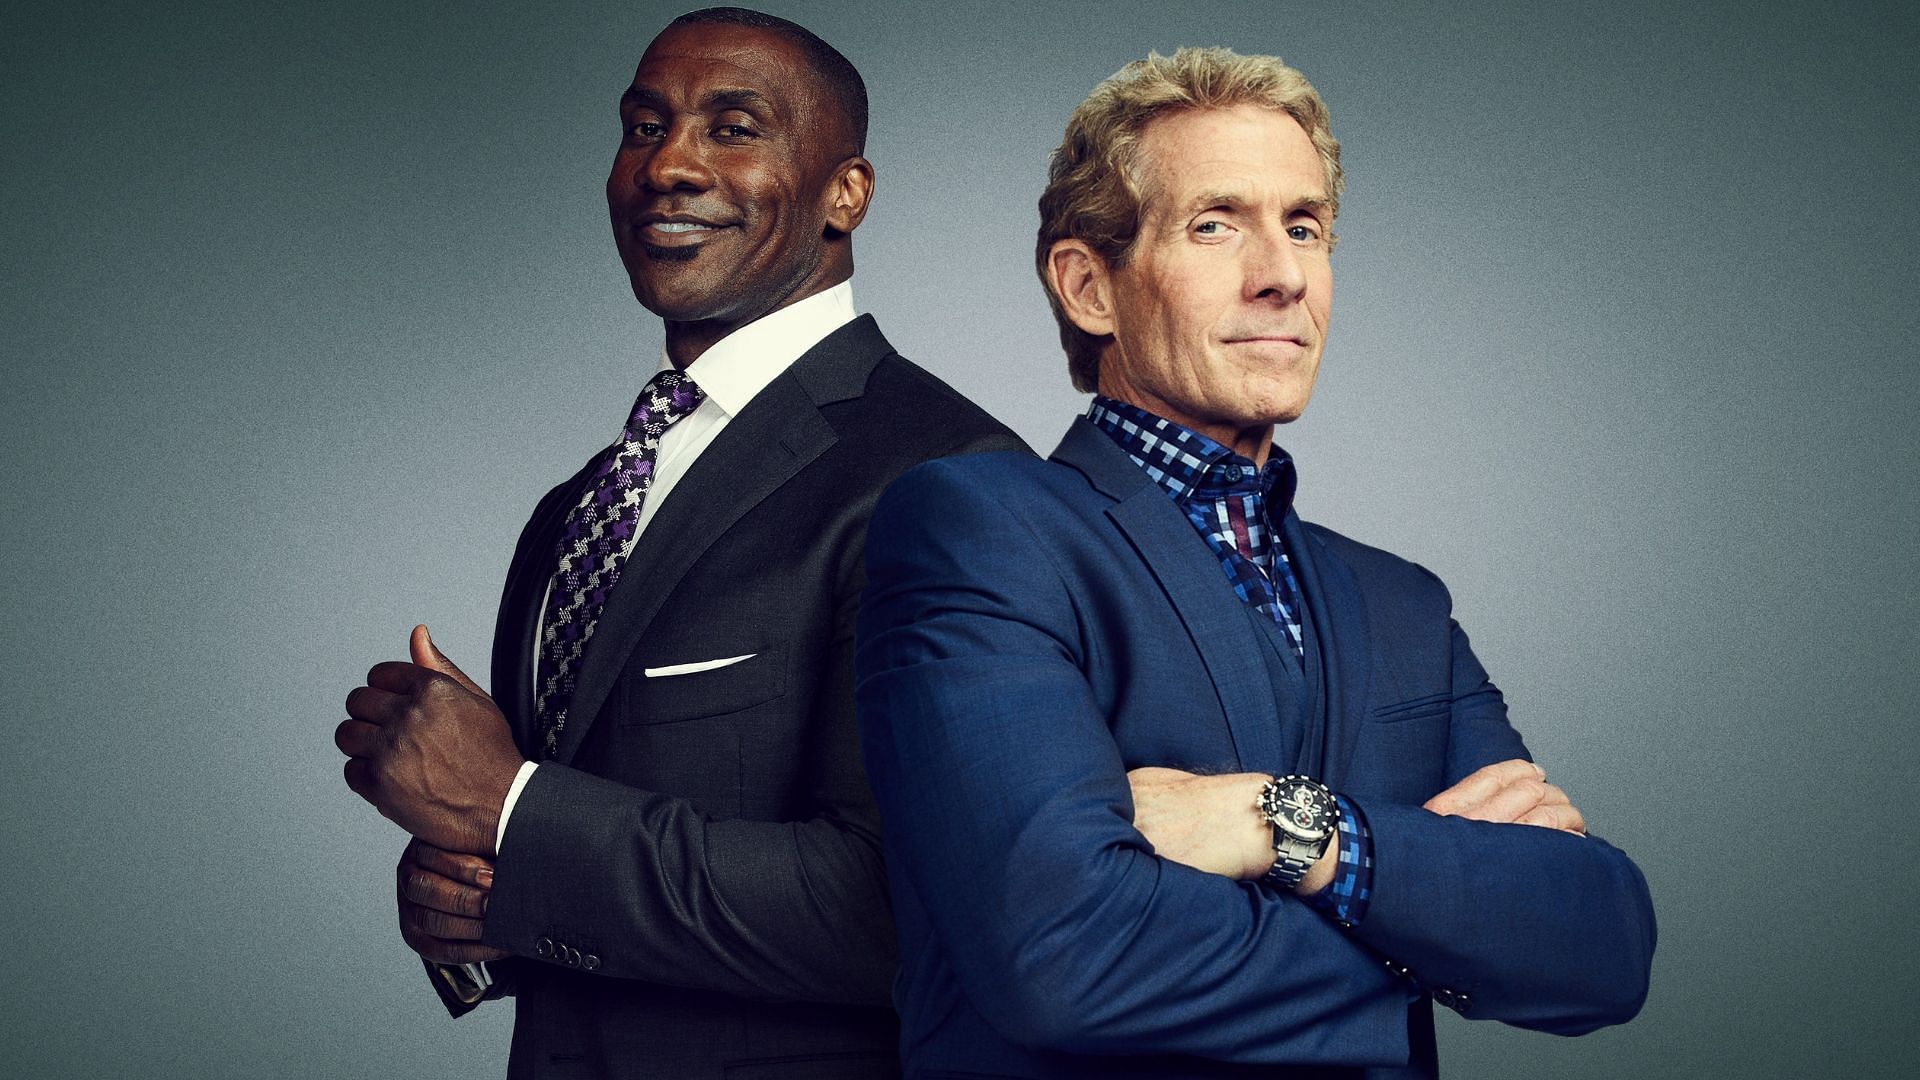 Shannon Sharpe will end his seven-year stint with FOX Sports